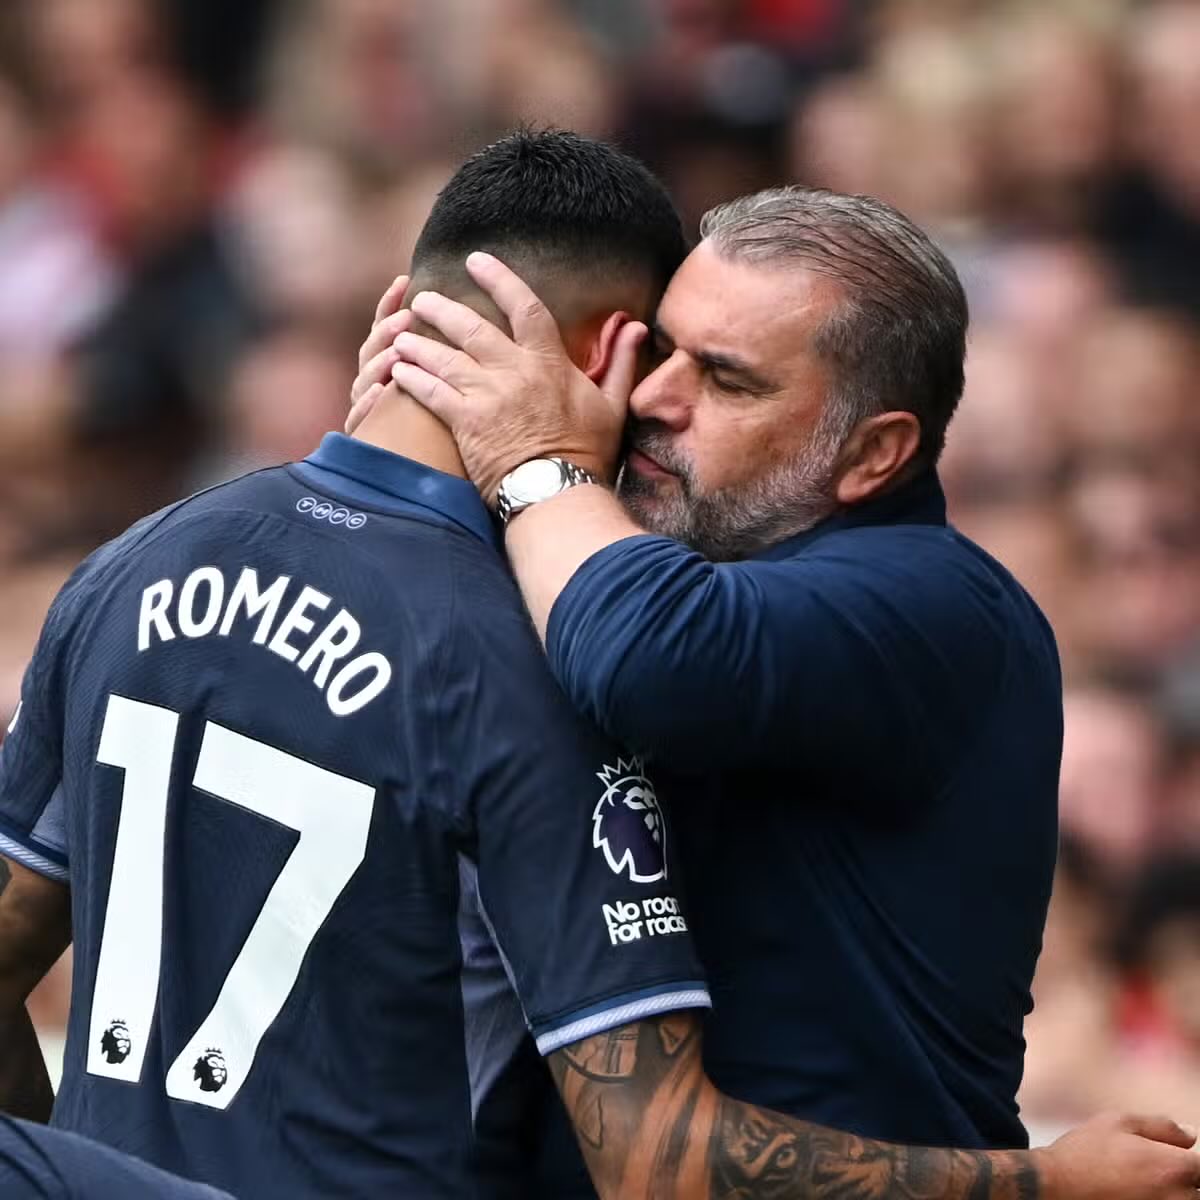 QUOTE 💬 |>> Ange on Cuti Romero: “He’s been outstanding for us, seeing how competitive he is and his qualities as a footballer. He’s a brilliant centre-back and an outstanding person.” #THFC | #COYS | #TTID